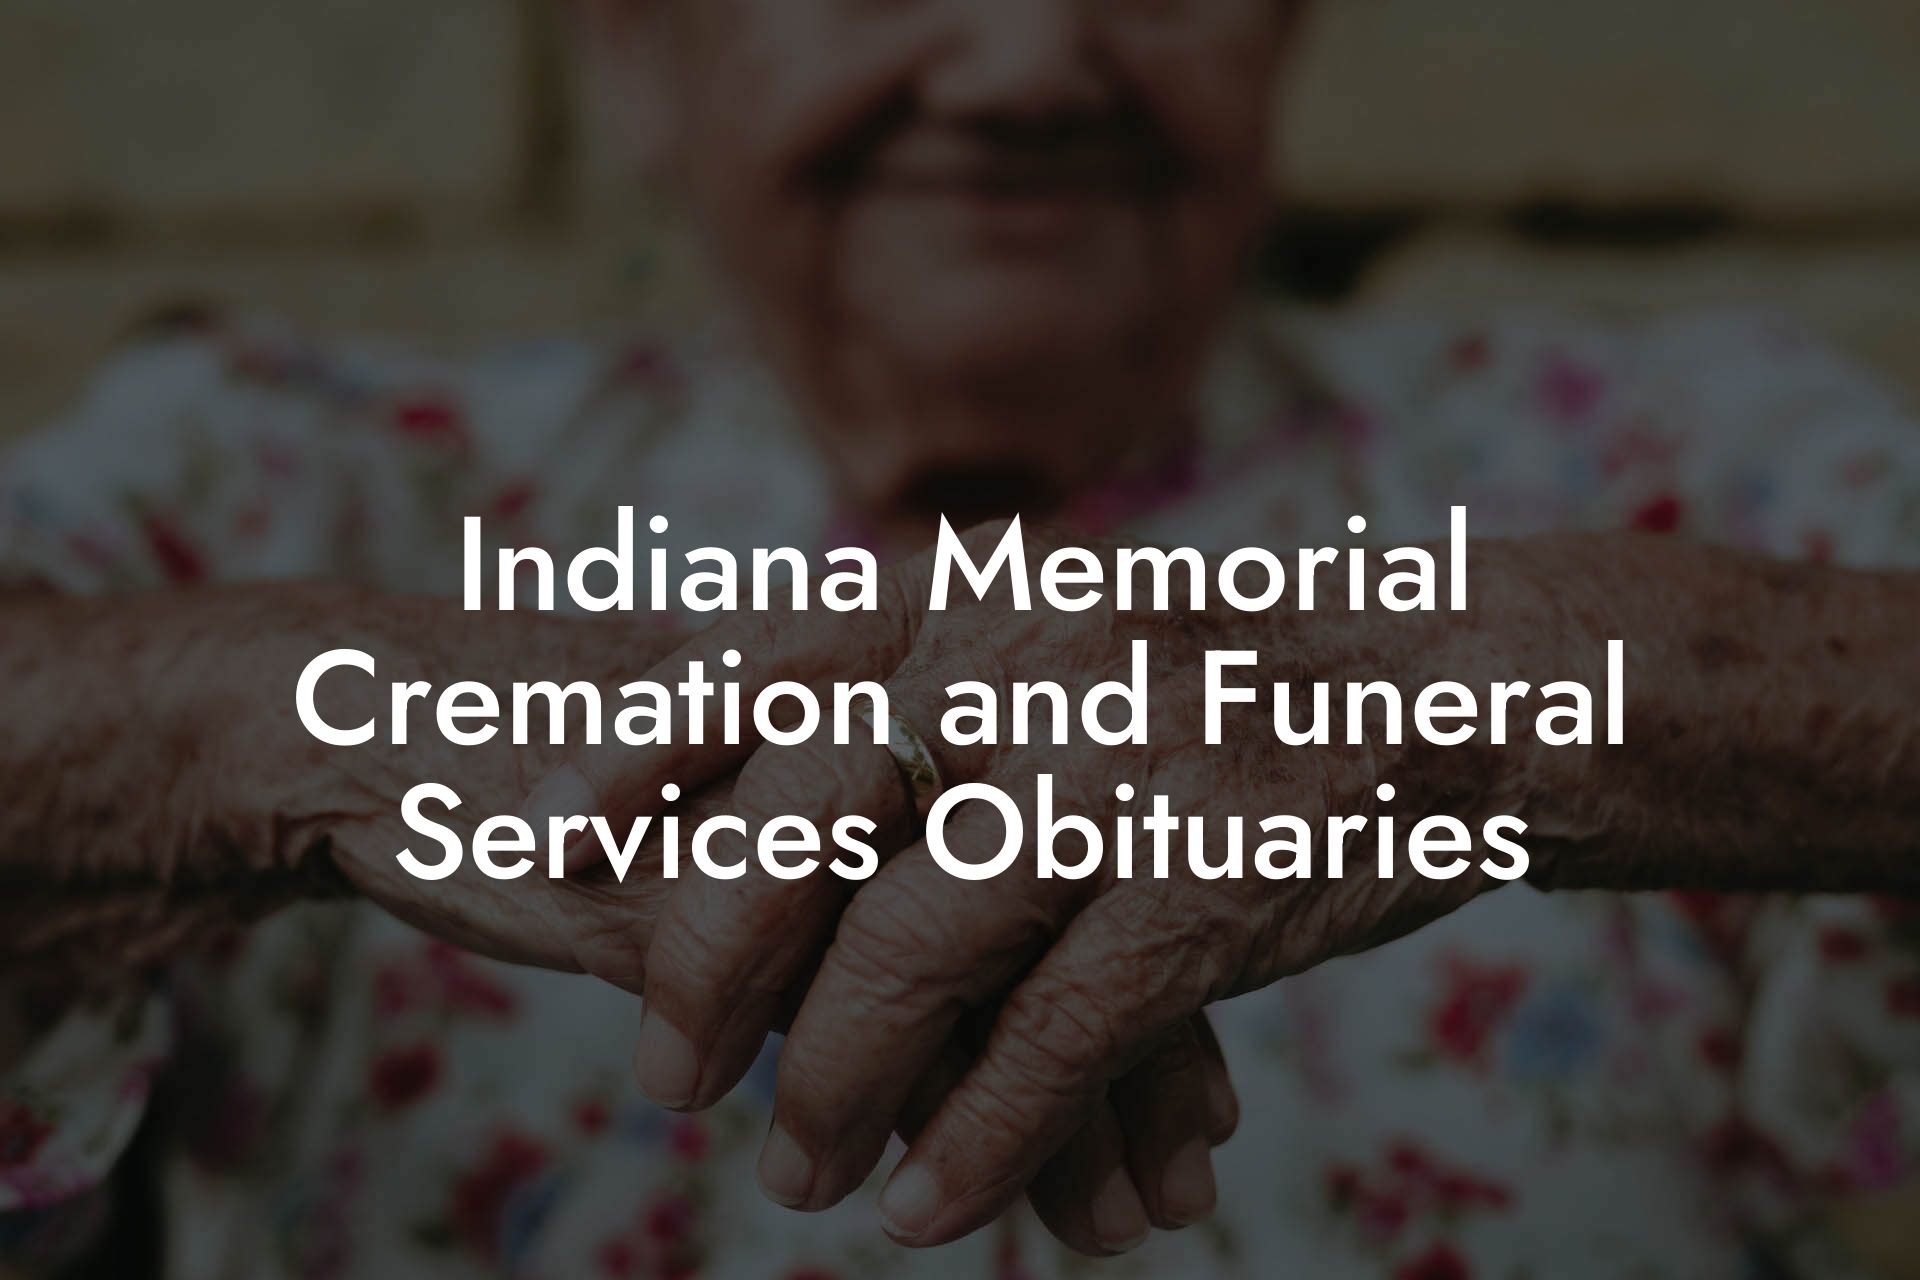 Indiana Memorial Cremation and Funeral Services Obituaries